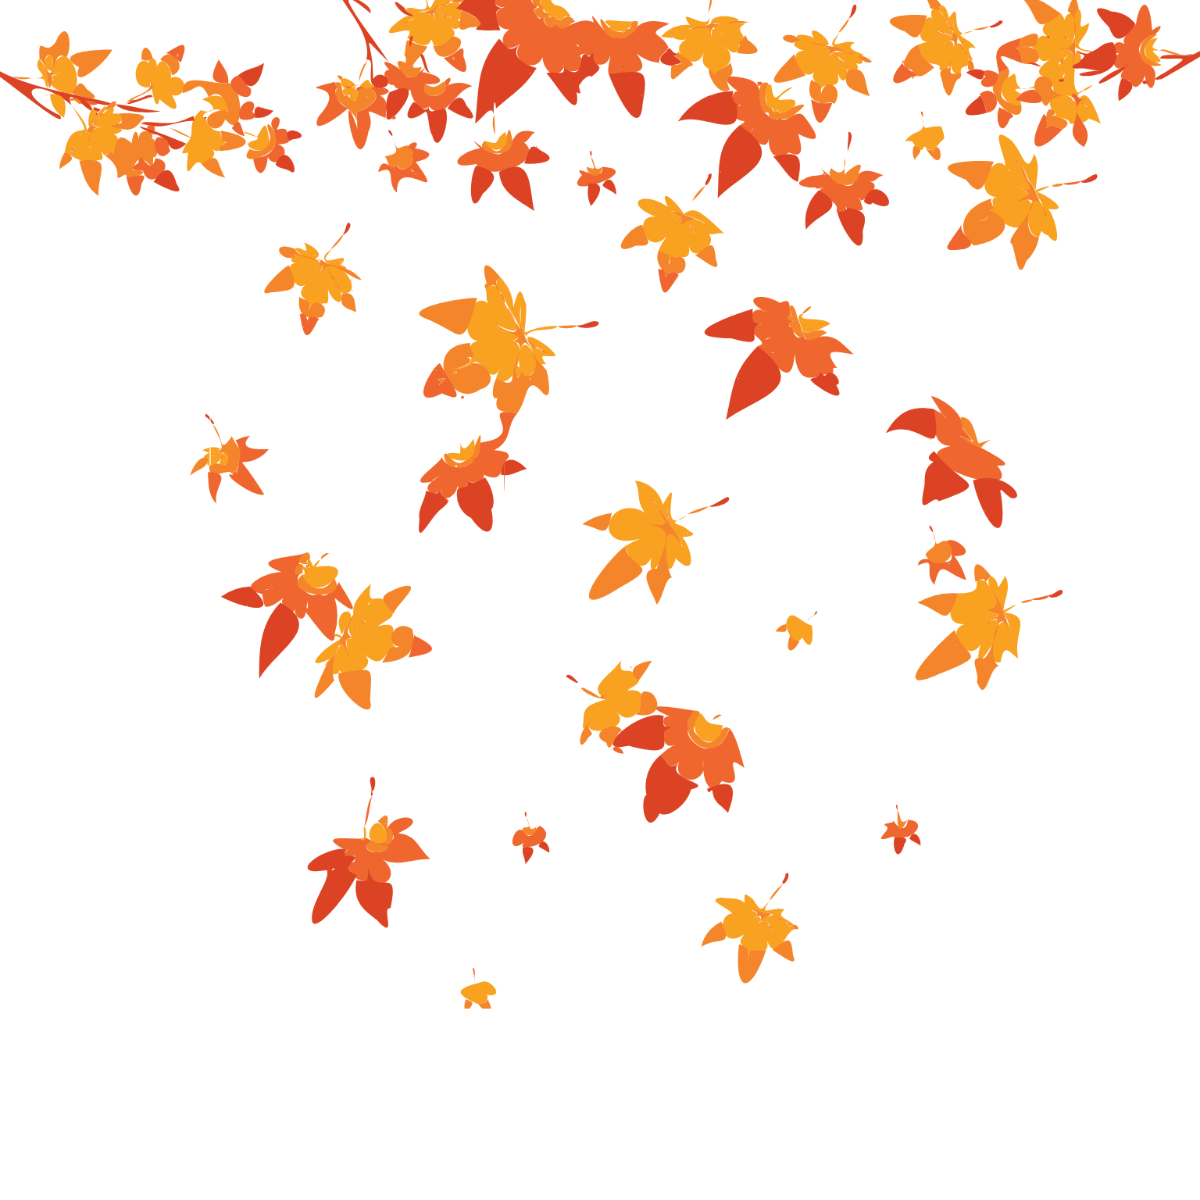 Autumn Falling Leaves Vector Template